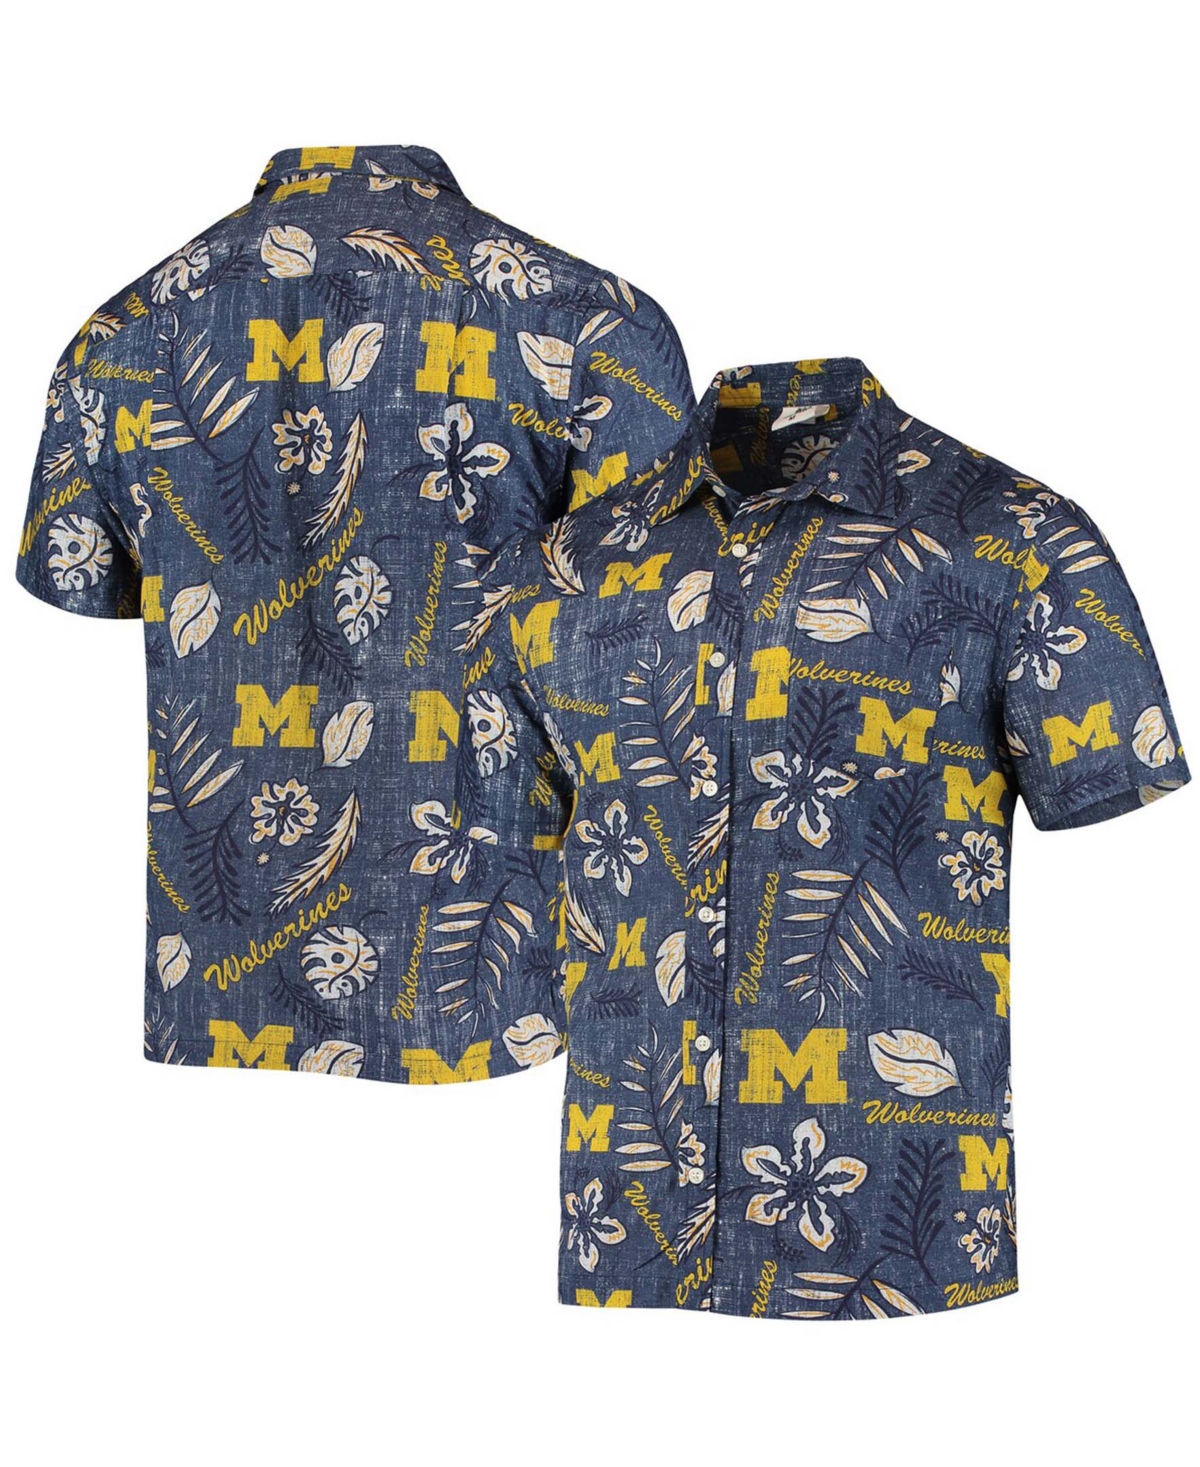 Men's Navy Michigan Wolverines Vintage-Like Floral Button-Up Shirt - Navy